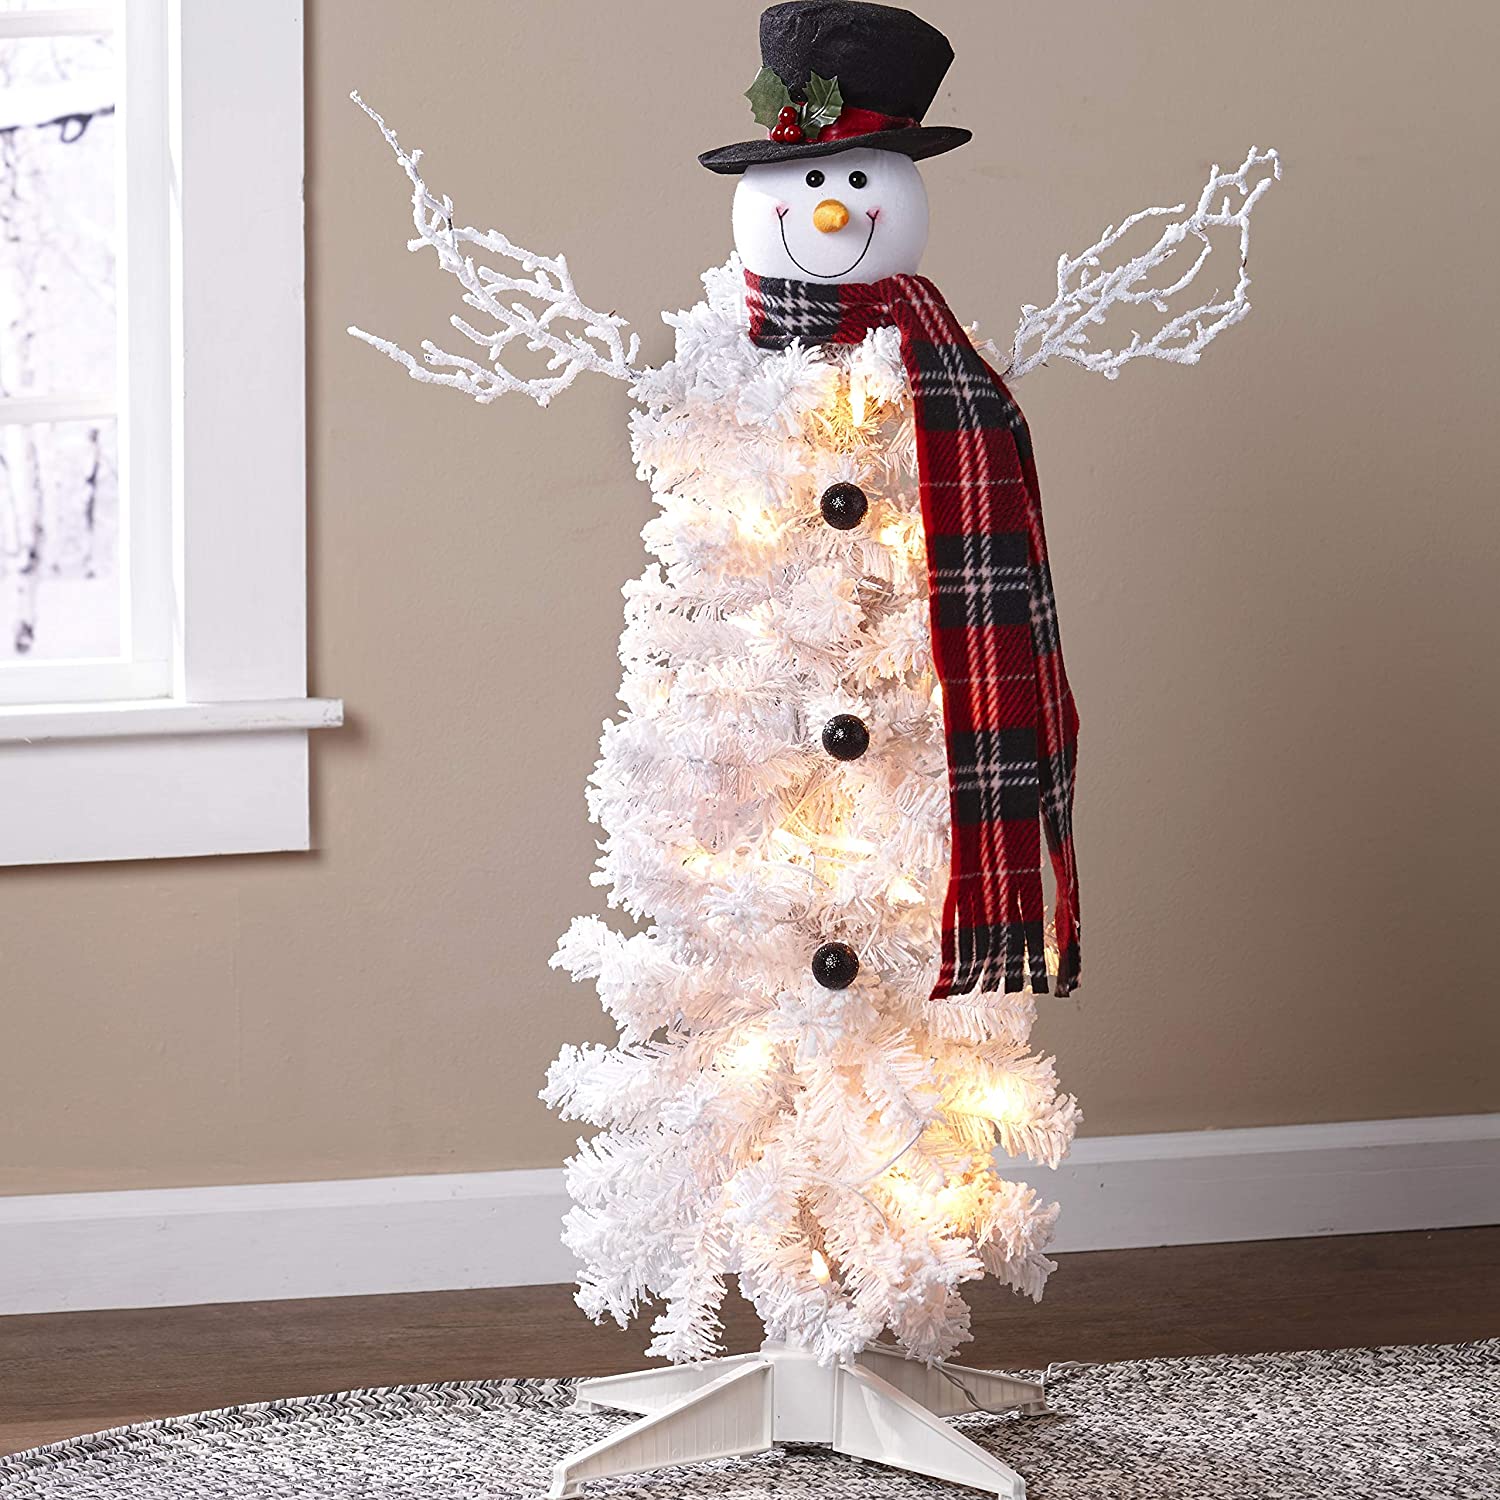  Vintage White Snowman With Trees and Gift Packages In